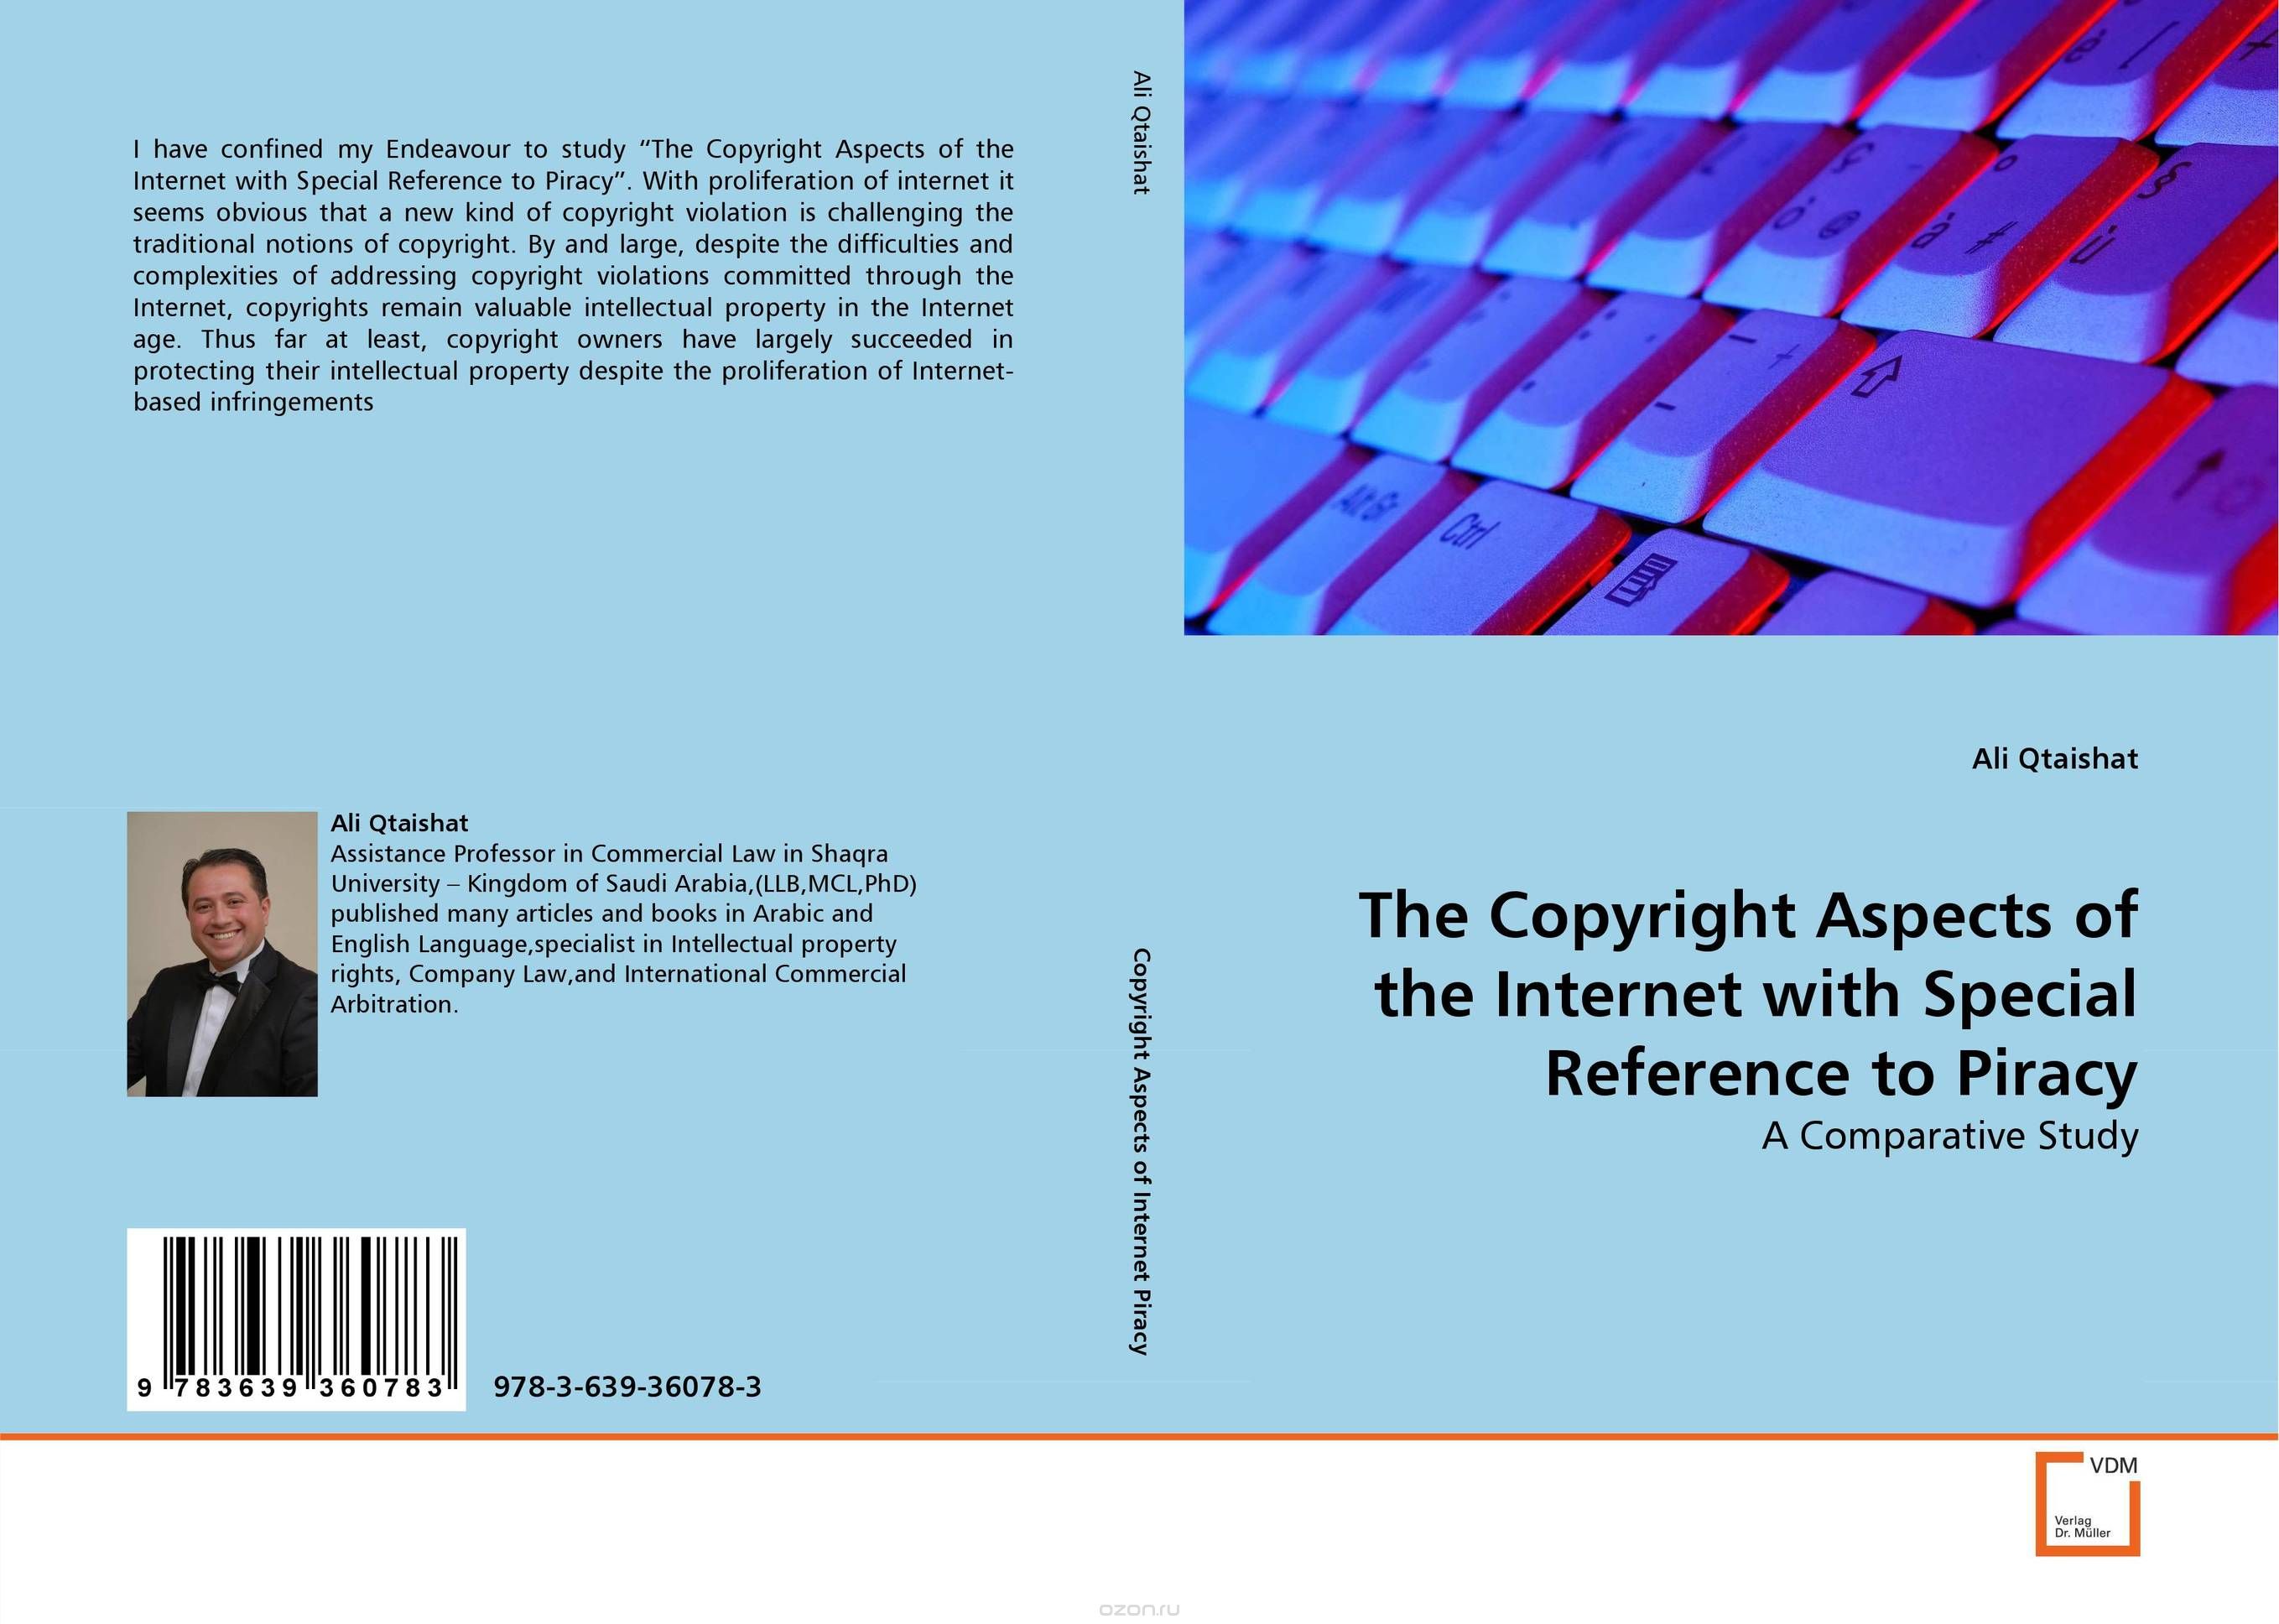 Скачать книгу "The Copyright Aspects of the Internet with Special Reference to Piracy"